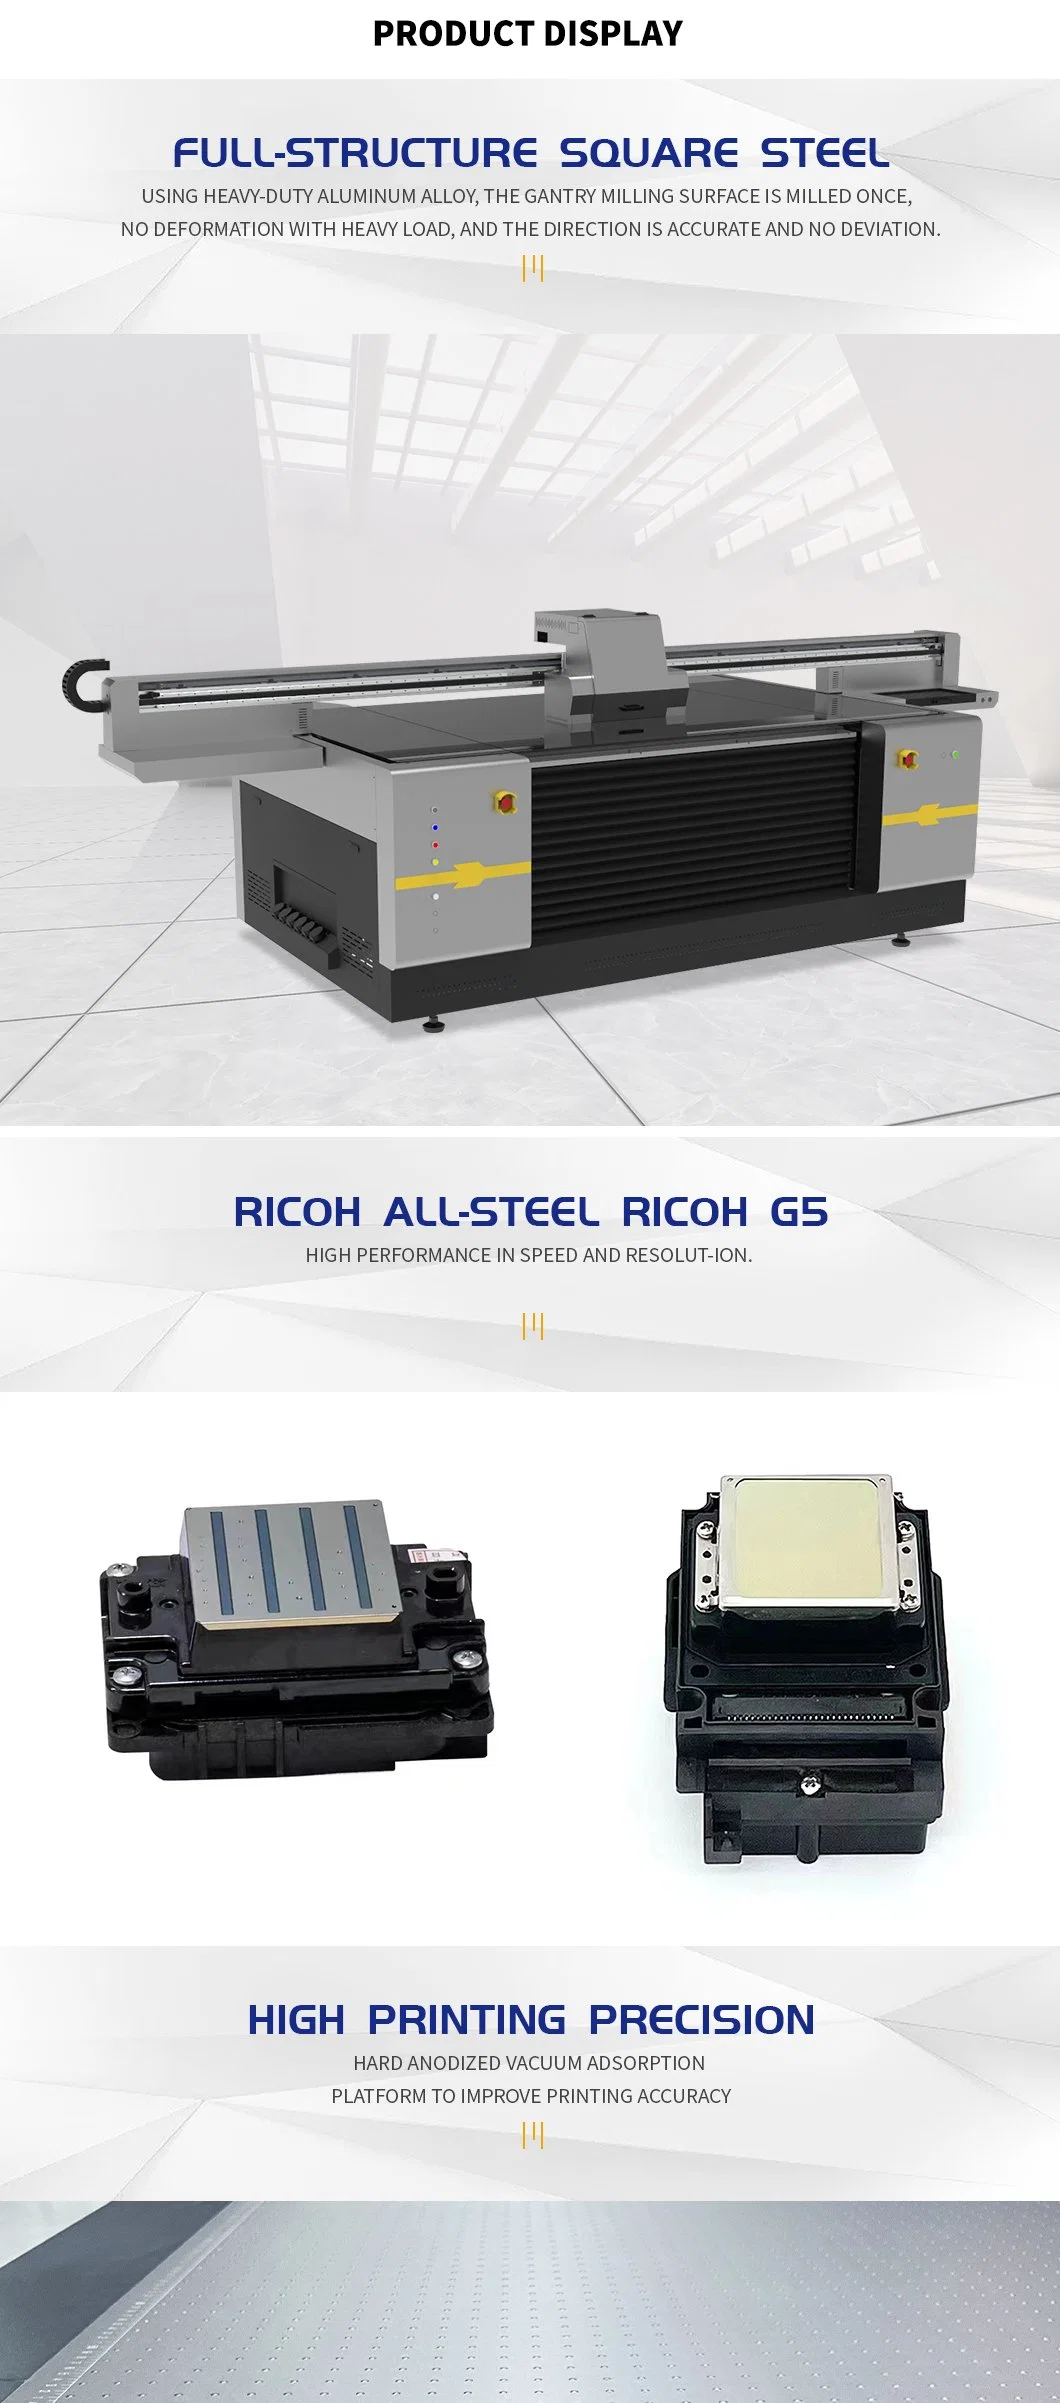 Large Format Printer 2.5m Size Digital Inkjet Printer with Ricoh G5 G5I Head for Wood and Glass Acrylic UV Flatbed Printers Solvent Flatbed Printer